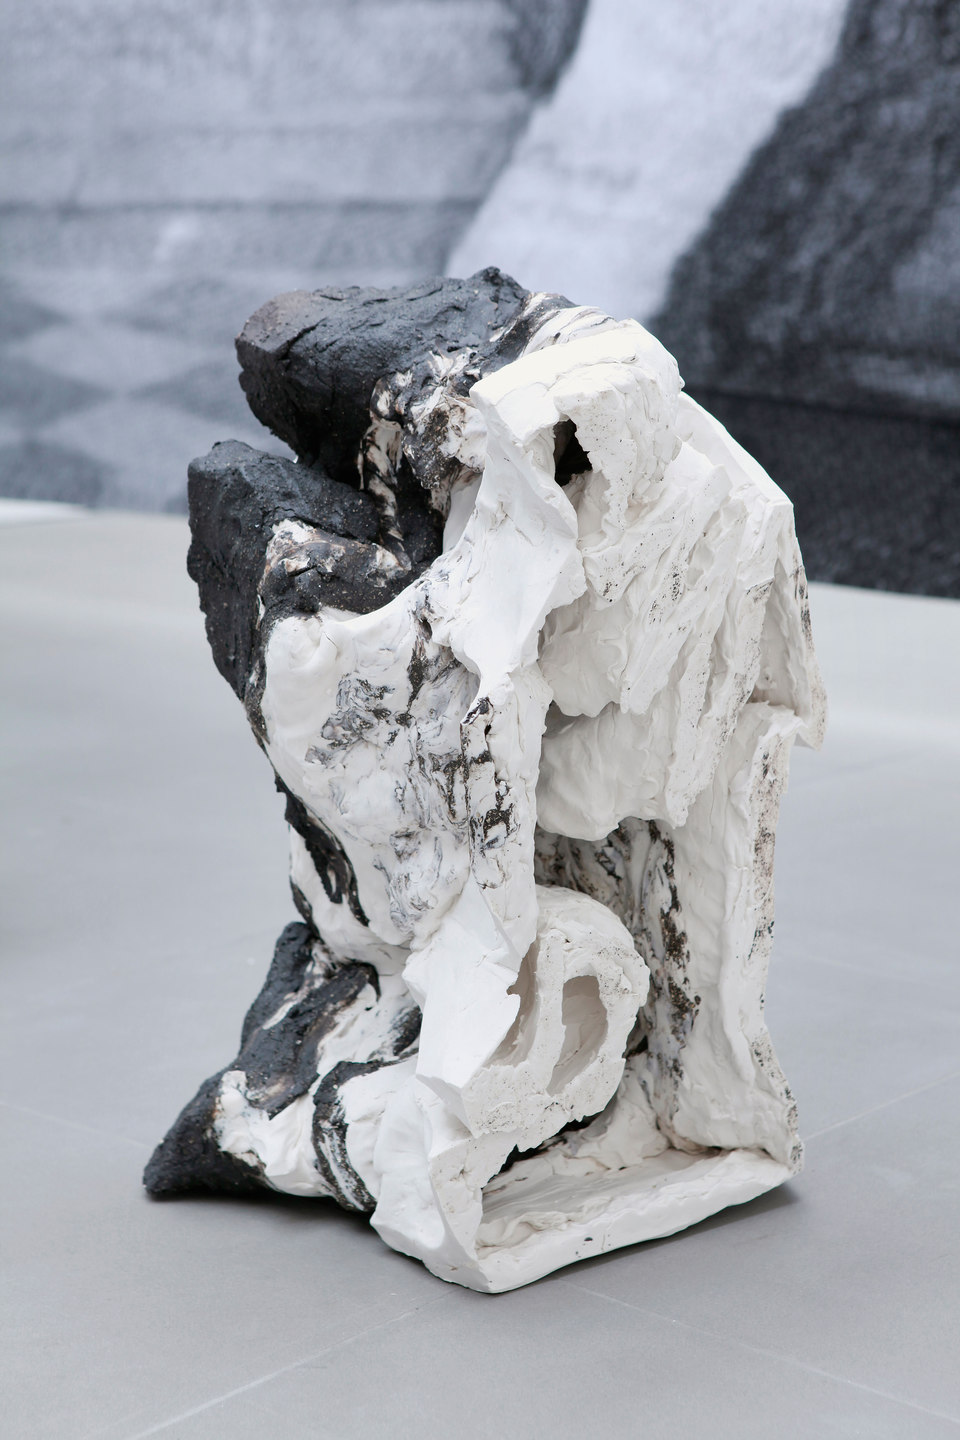 Peles Empire, Formation, 'formation 3', 2013, unglazed porcelain with black grog, h. 25 x w. 50 x d. 33 cm, Cell Project Space